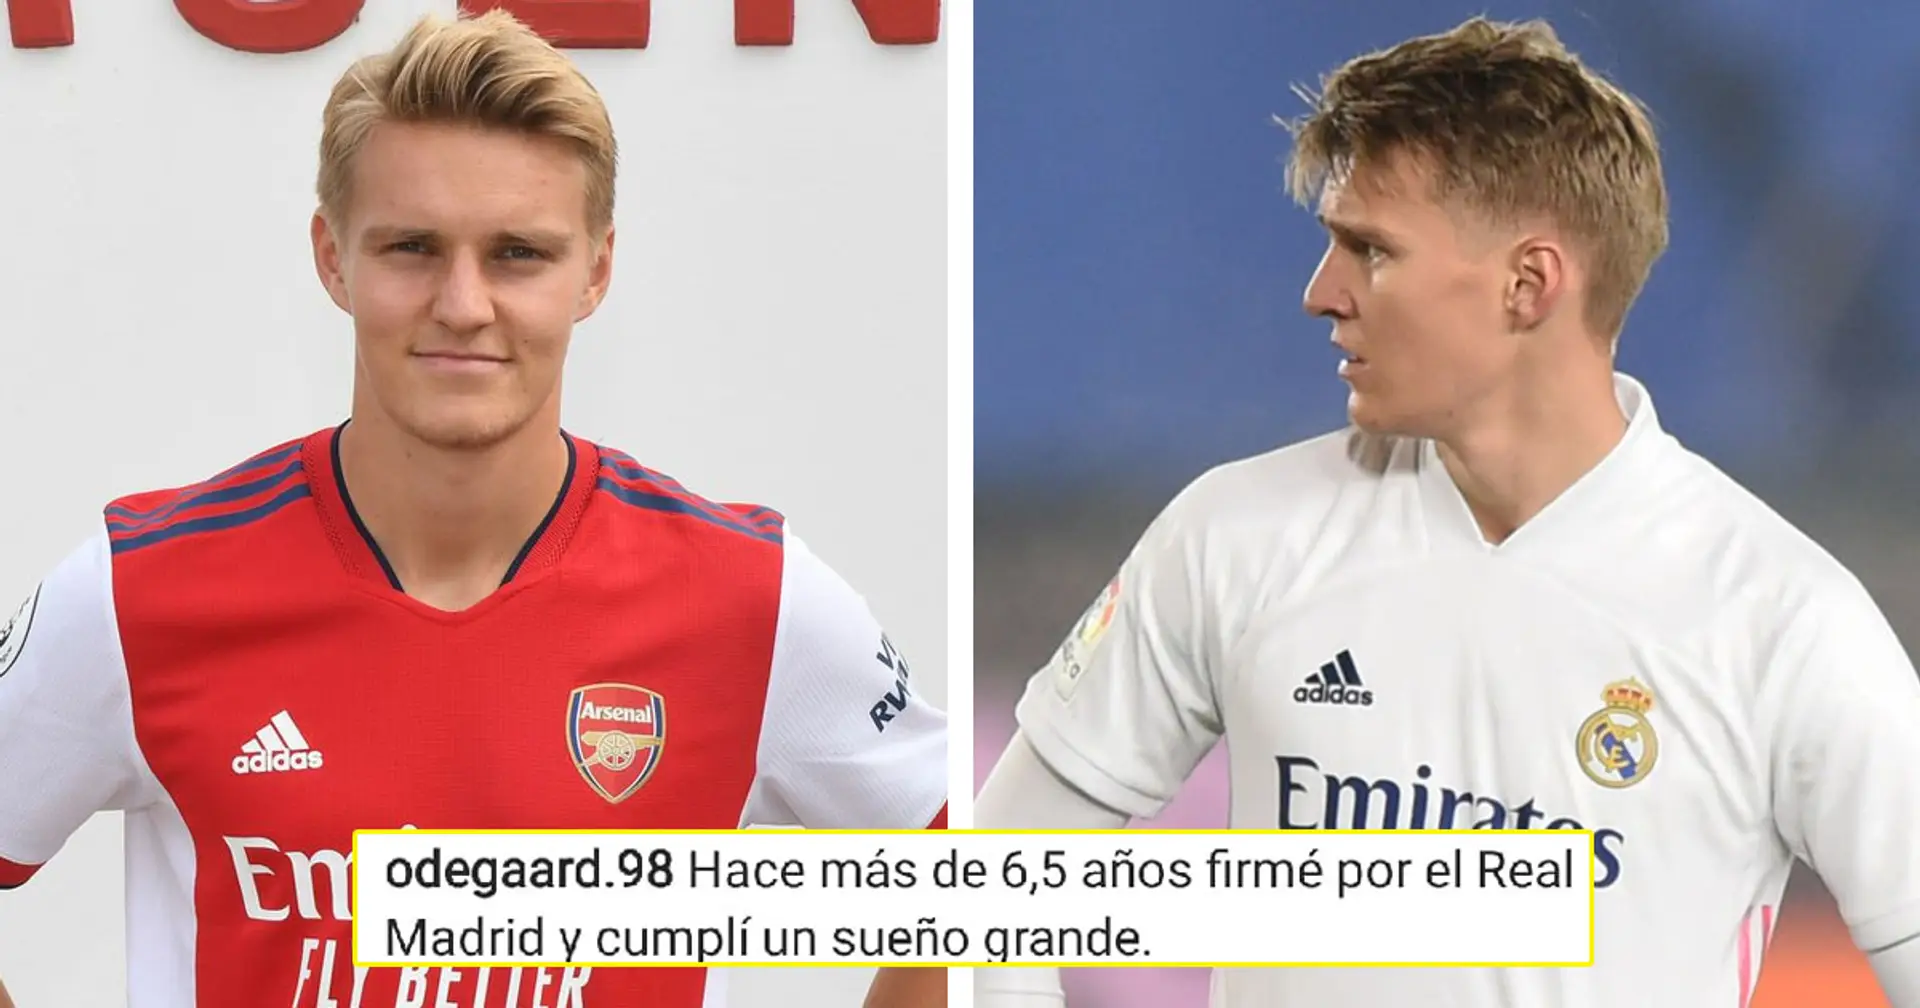 'I have my reasons to leave': Odegaard pens farewell letter after Arsenal move